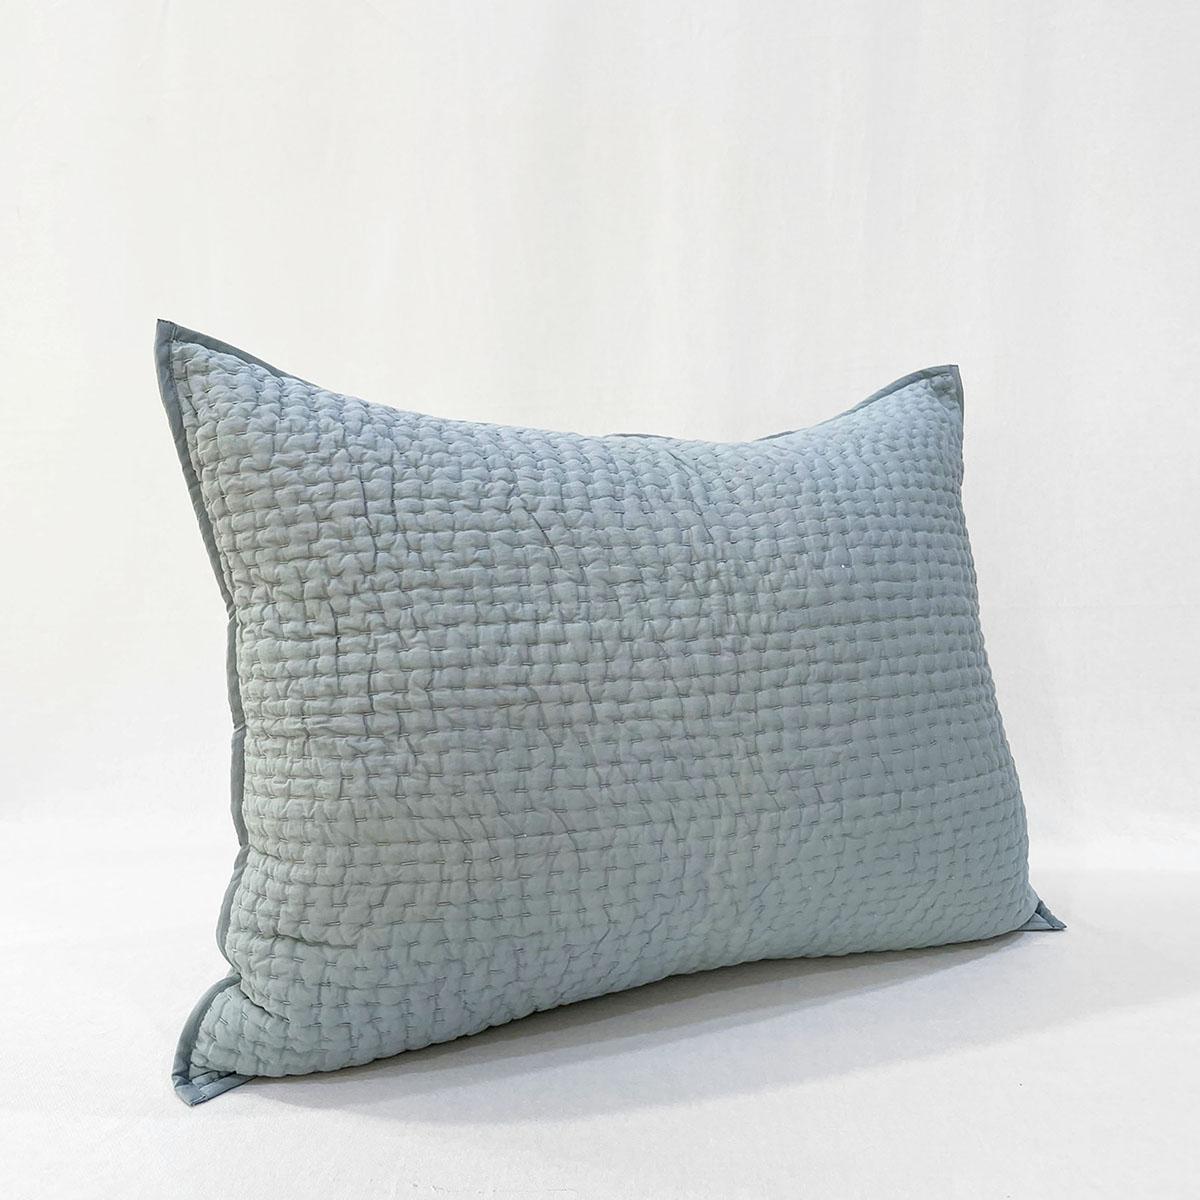 DUCK EGG colour Kantha cotton Quilted pillow cases, Sizes available